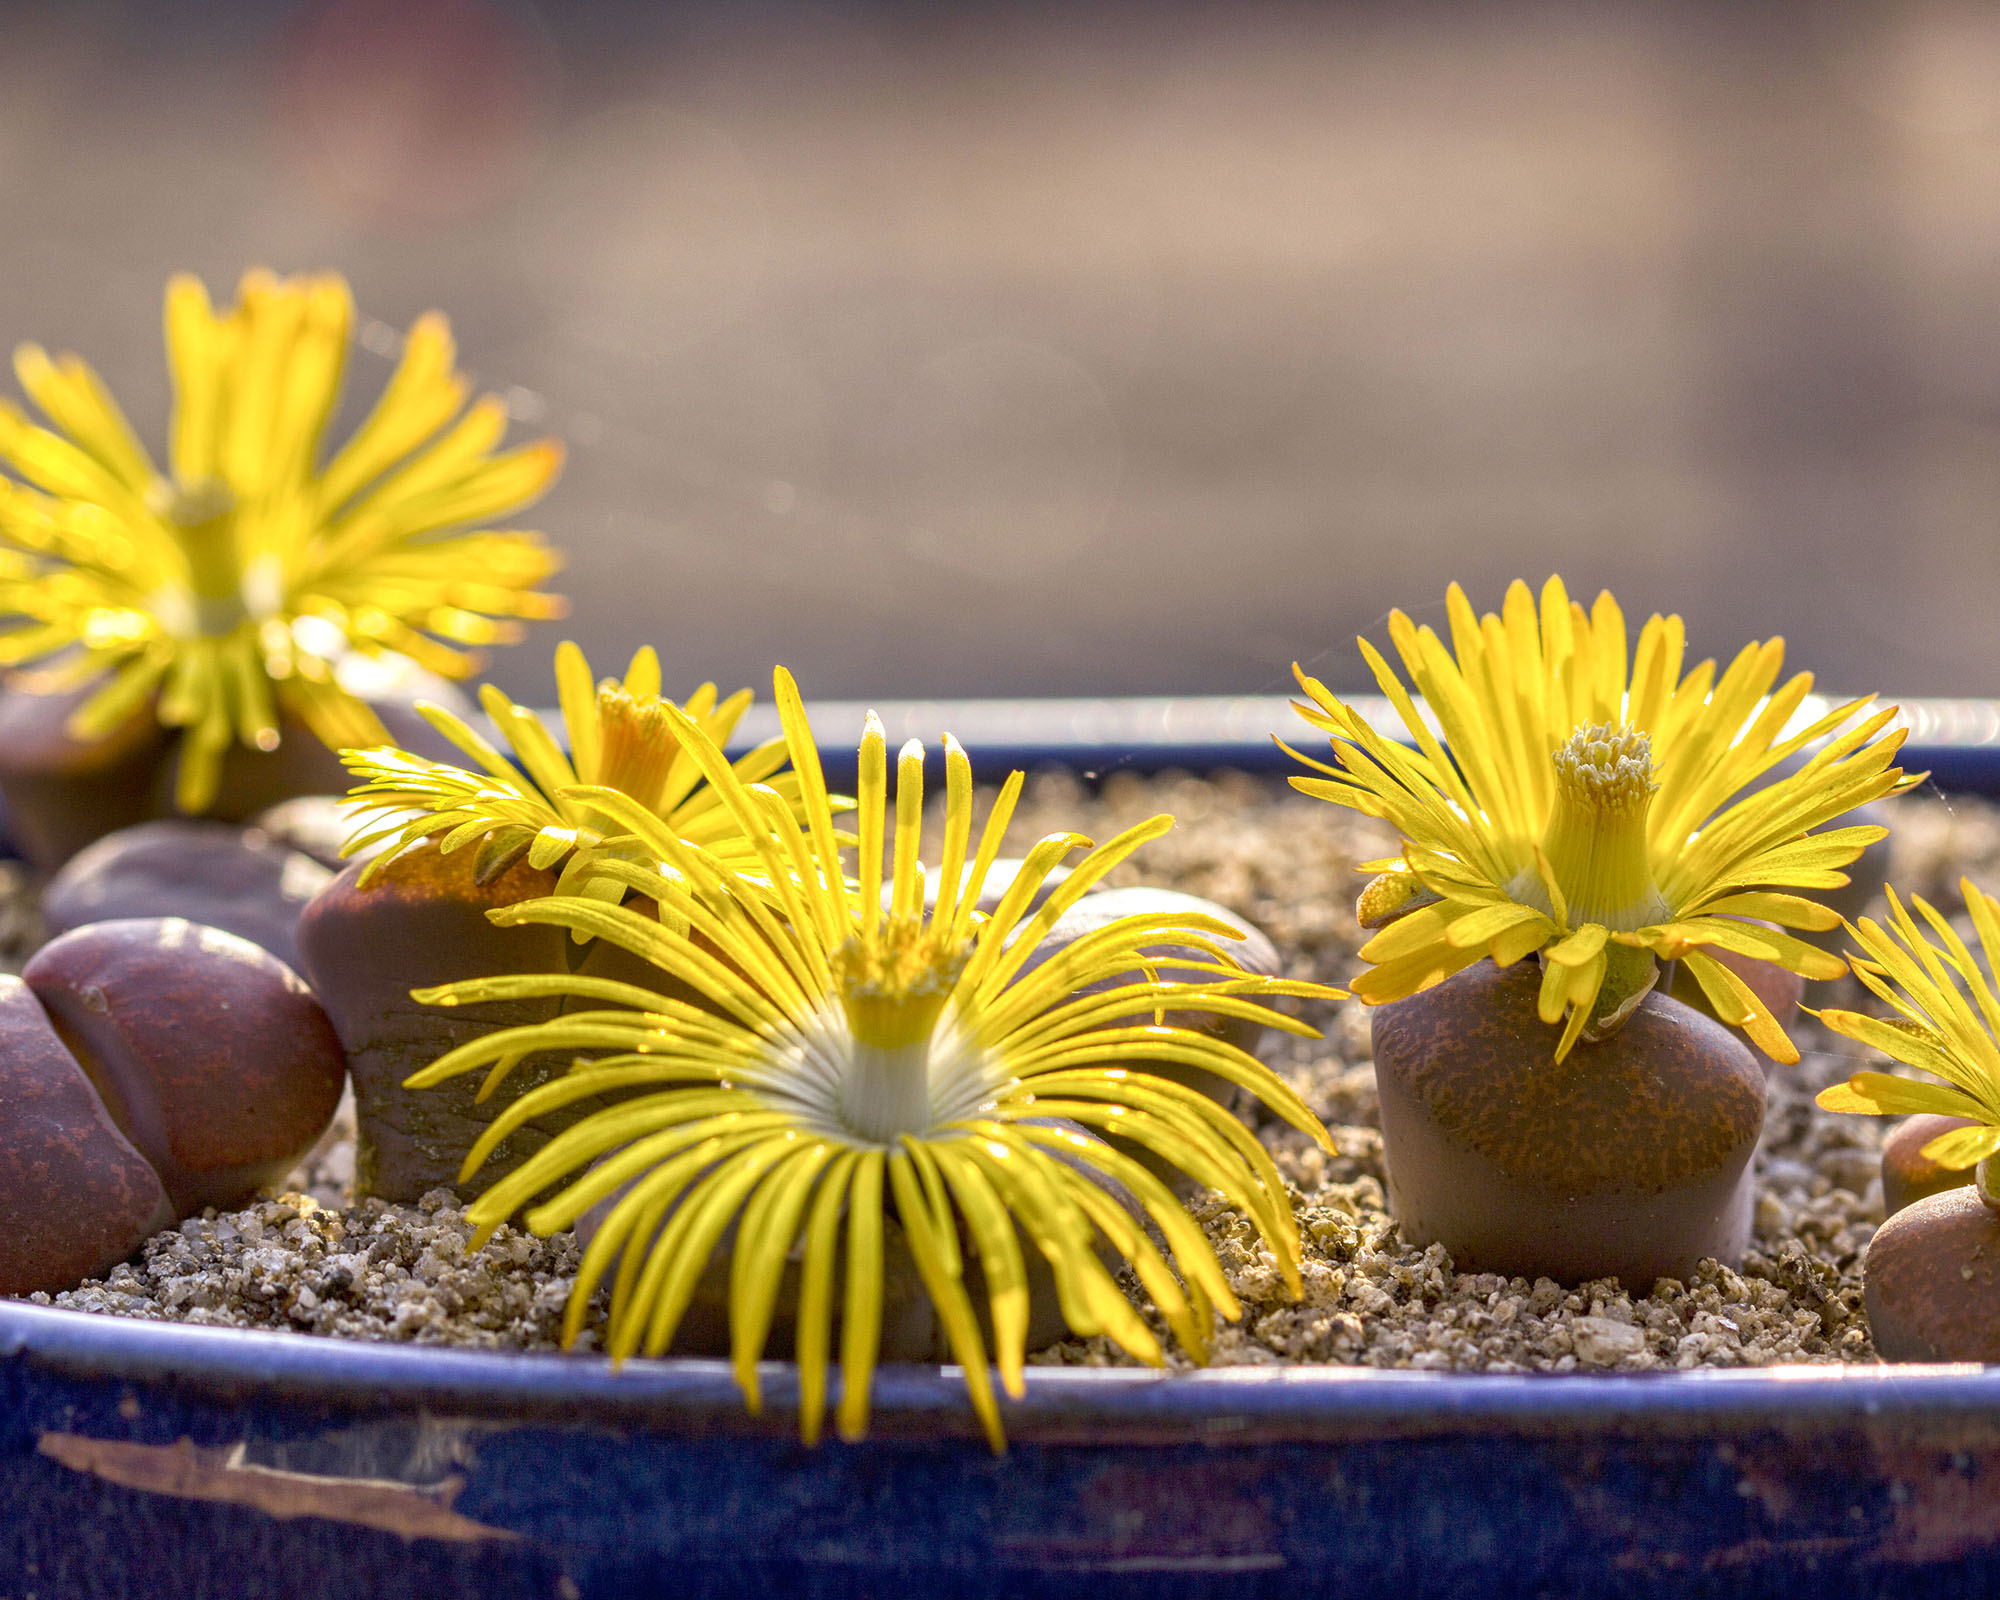 Lithops blooming with yellow flowers, in blue ceramic pot